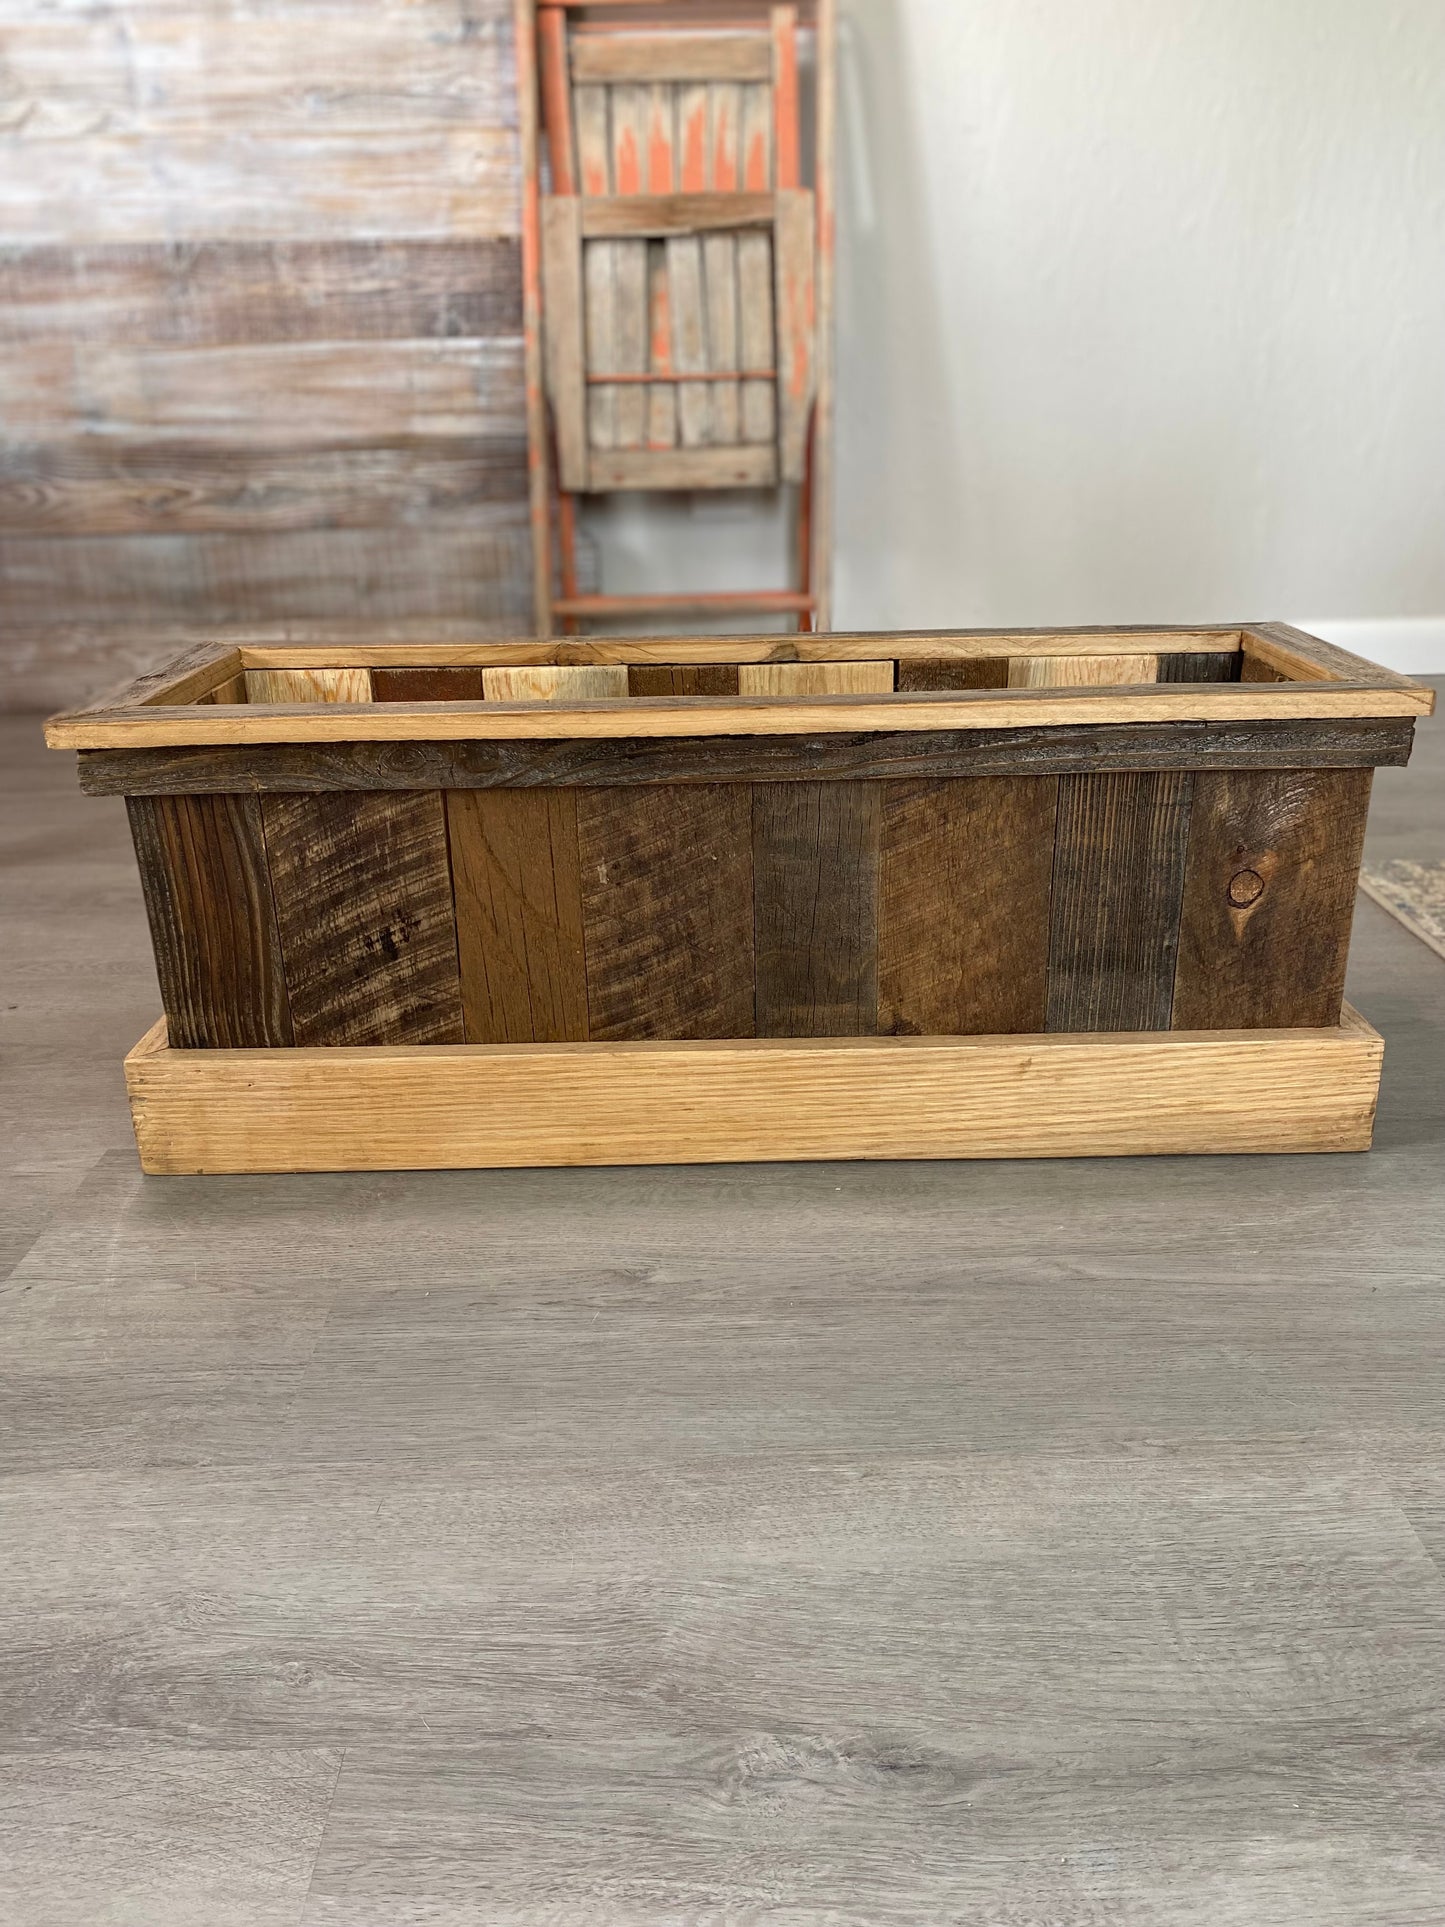 Reclaimed Wood Planter Box - Dark and Light Stains